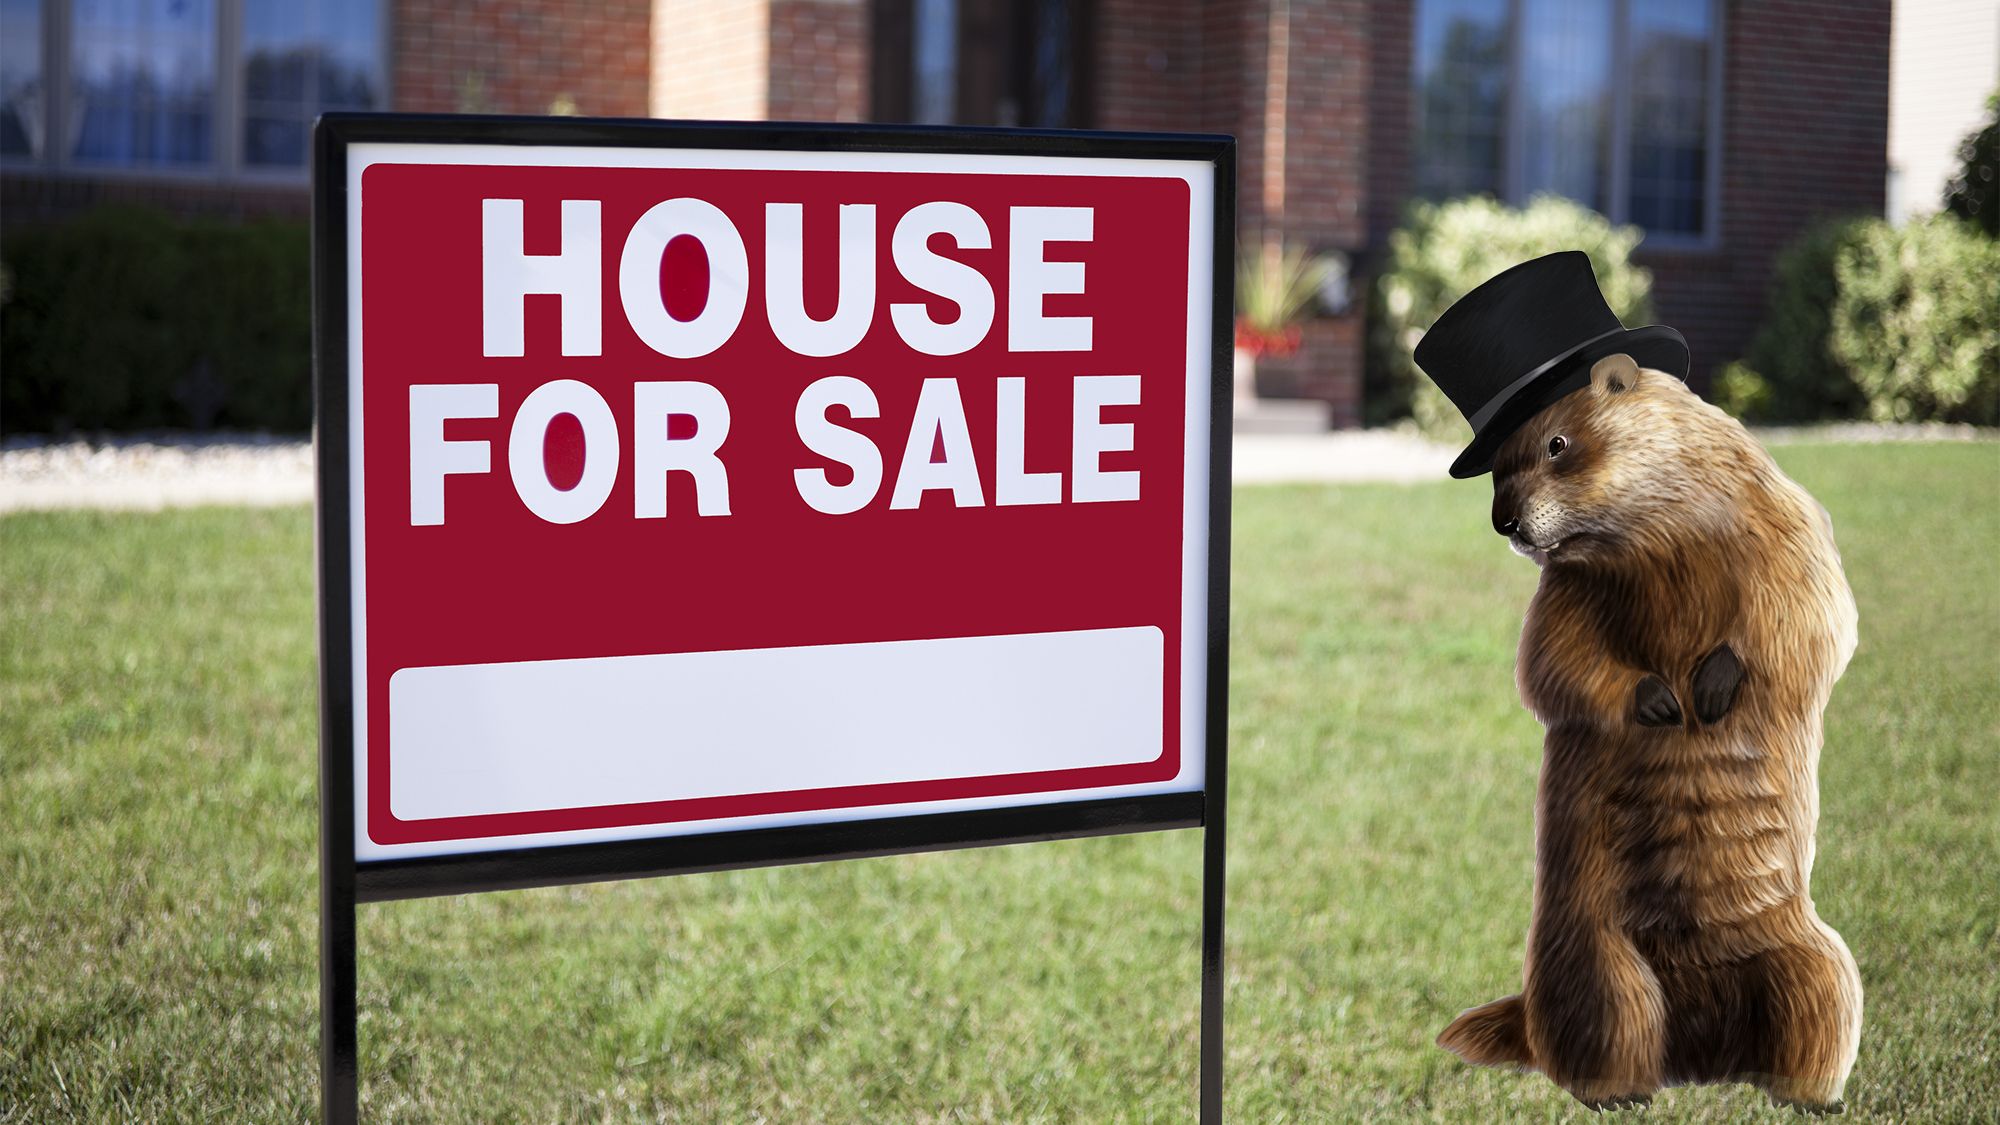 Super Bowl Weekend, the Groundhog Day of Real Estate